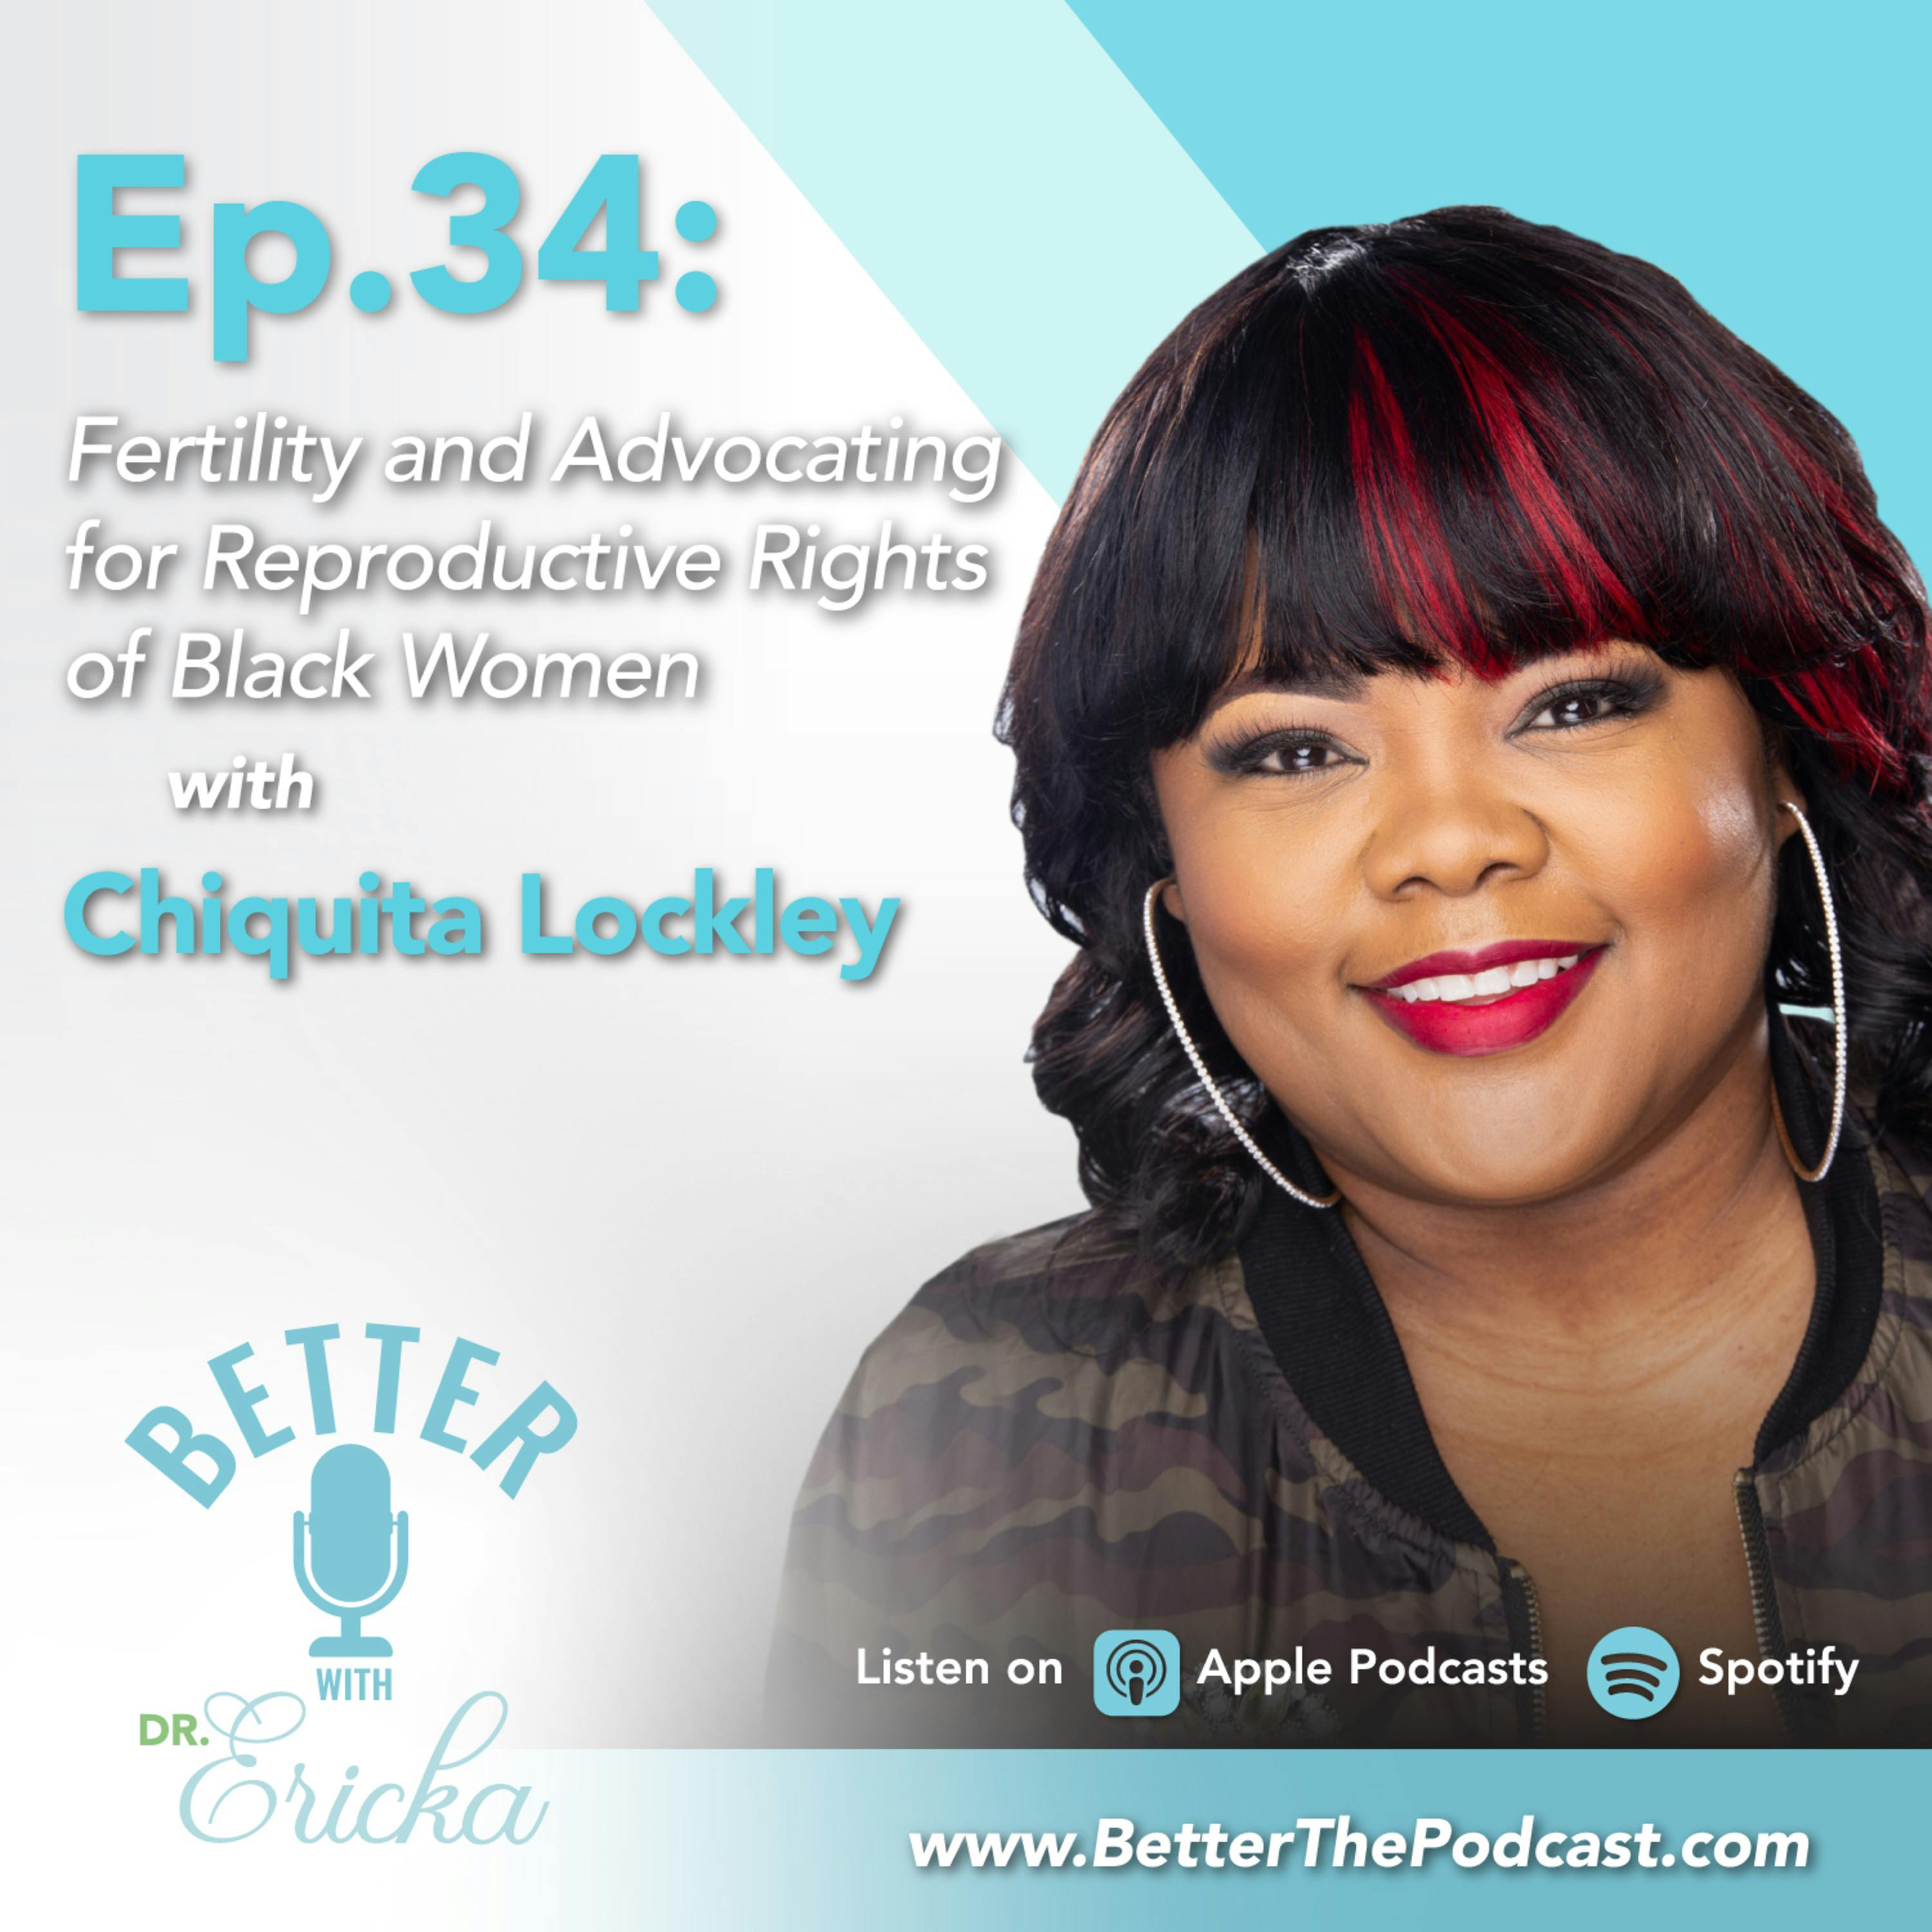 Fertility and Advocating for Reproductive Rights of Black Women with Chiquita Lockley